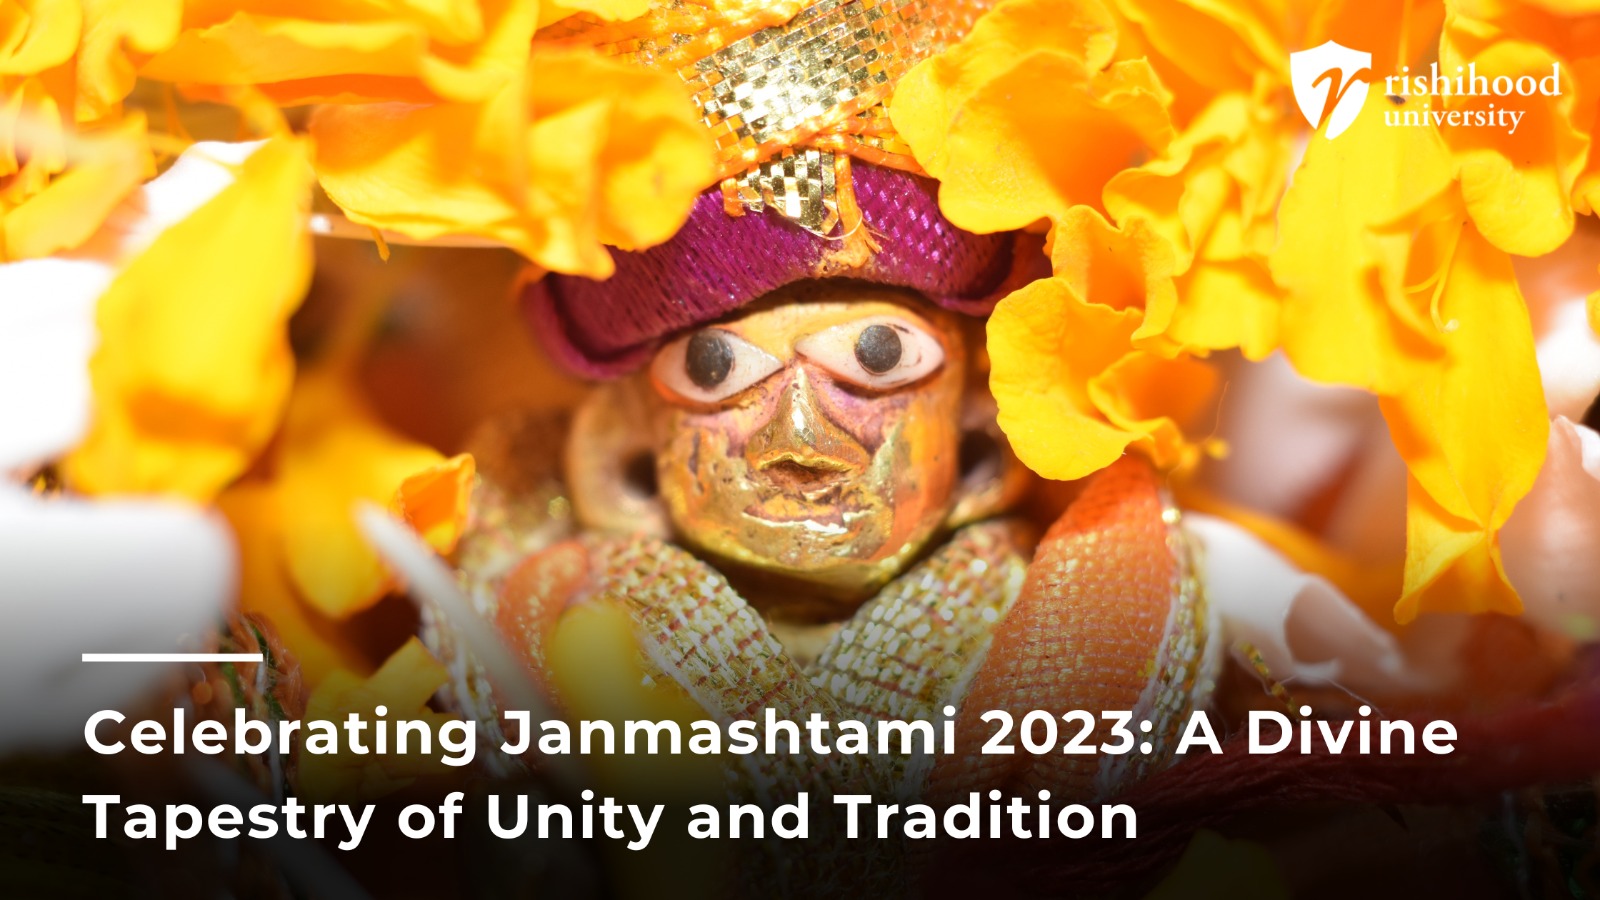 Celebrating Janmashtami 2023: A Divine Tapestry of Unity and Tradition